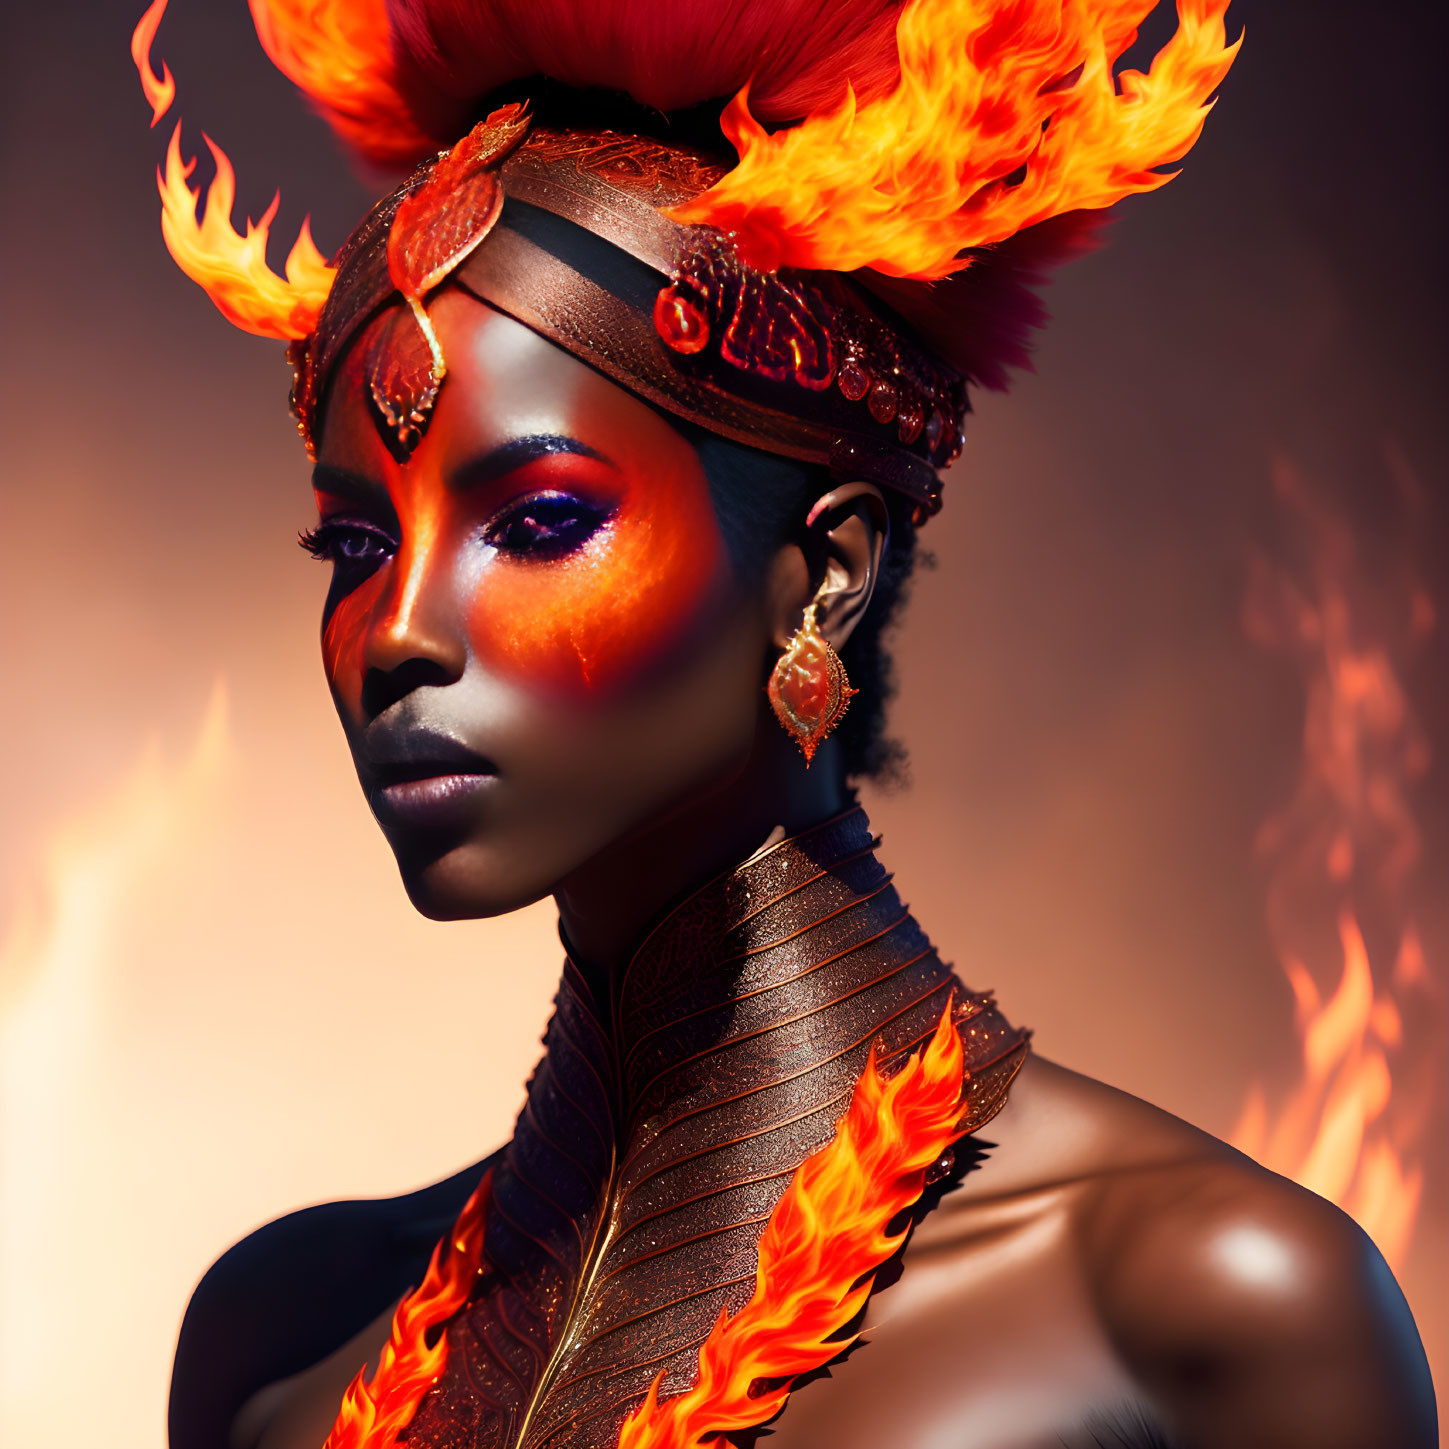 Digital artwork of woman with fiery makeup, feathered headpiece, and flame motifs against flames